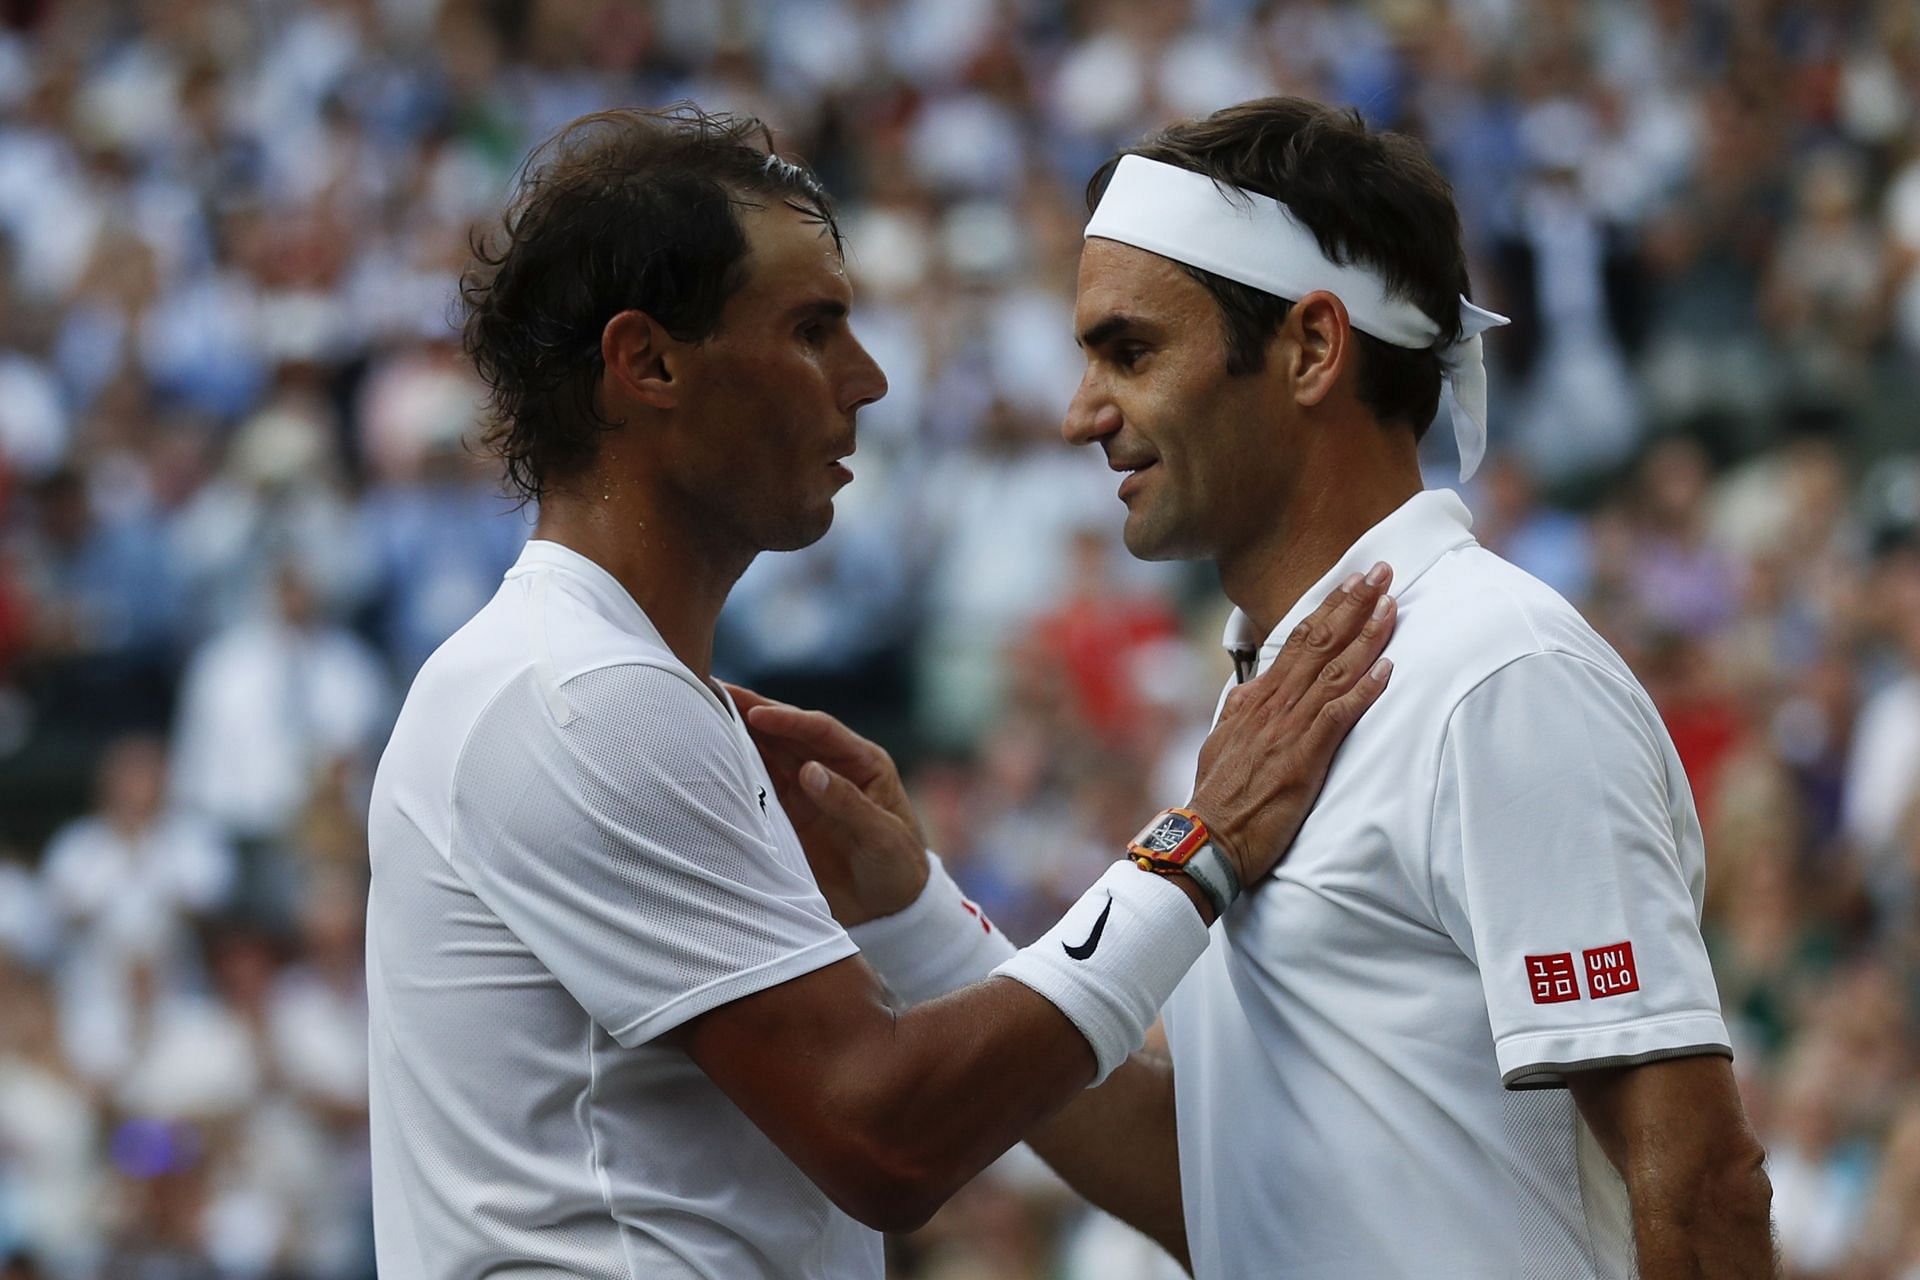 Rafael Nadal lost to Federer in the Wimbledon semifinals of 2019